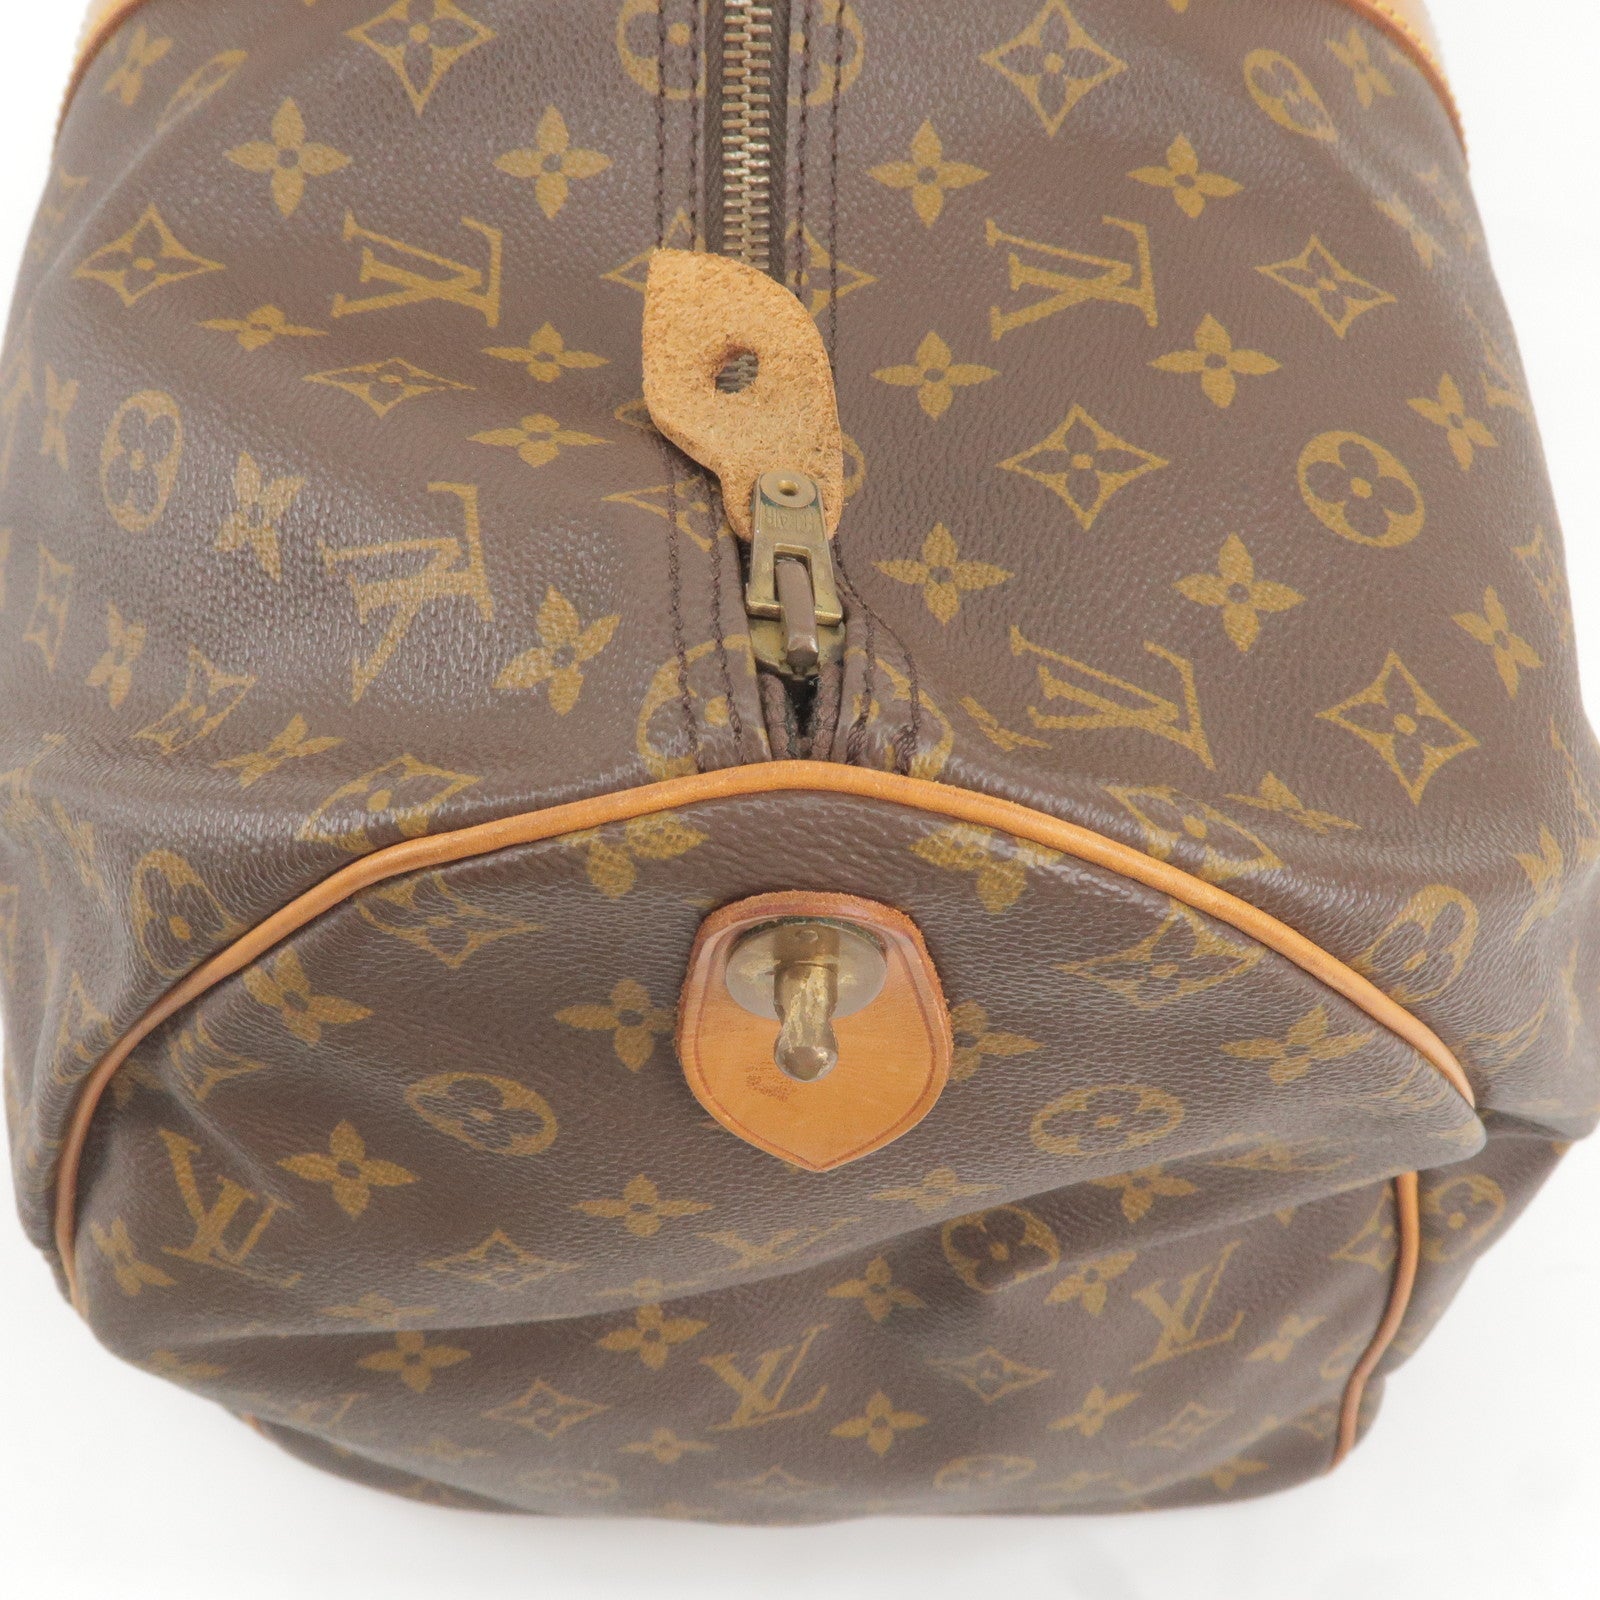 LOUIS VUITTON VINTAGE STYLES TO BUY NOW: PRE-LOVED LUXURY STYLES 